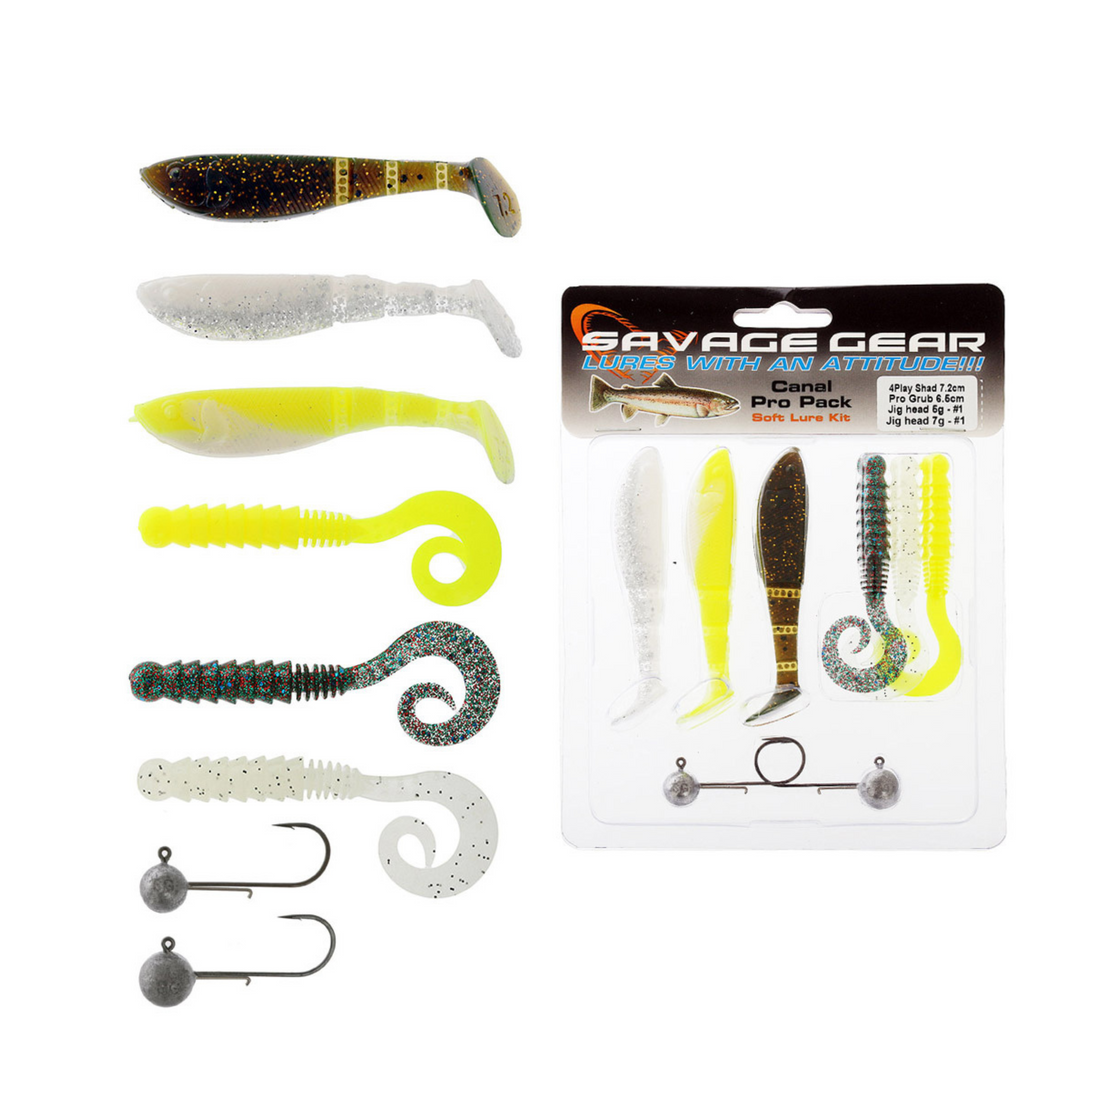 SAVAGE PERCH CANAL PRO PACK 6 2PC